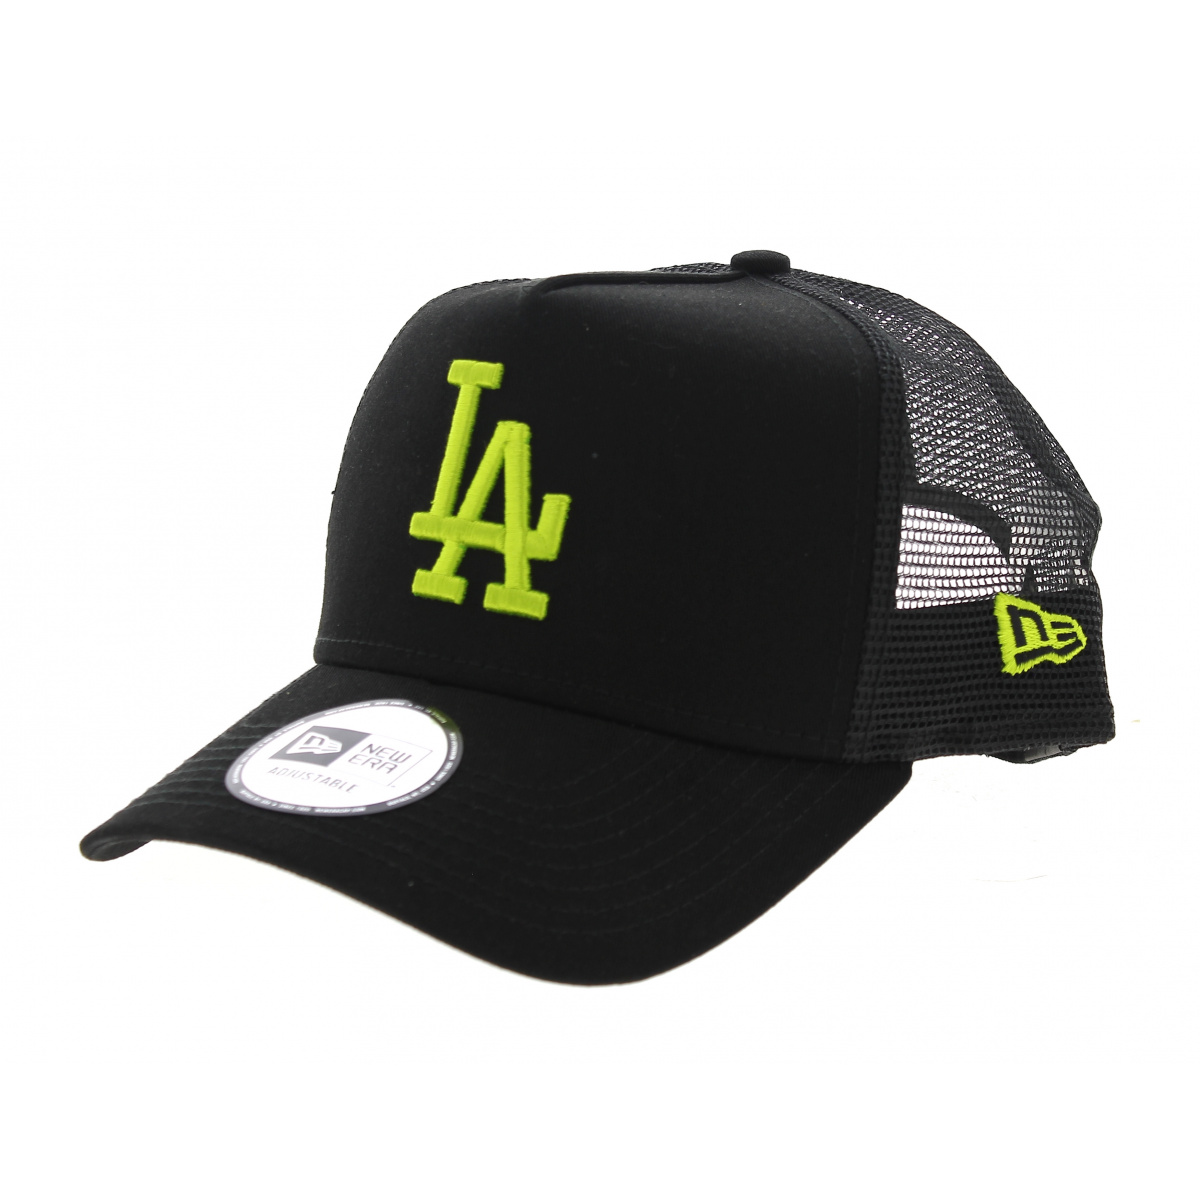 Los Angeles Dodgers Essential Black/Fluo- New Era Cap Reference : 8795 ...